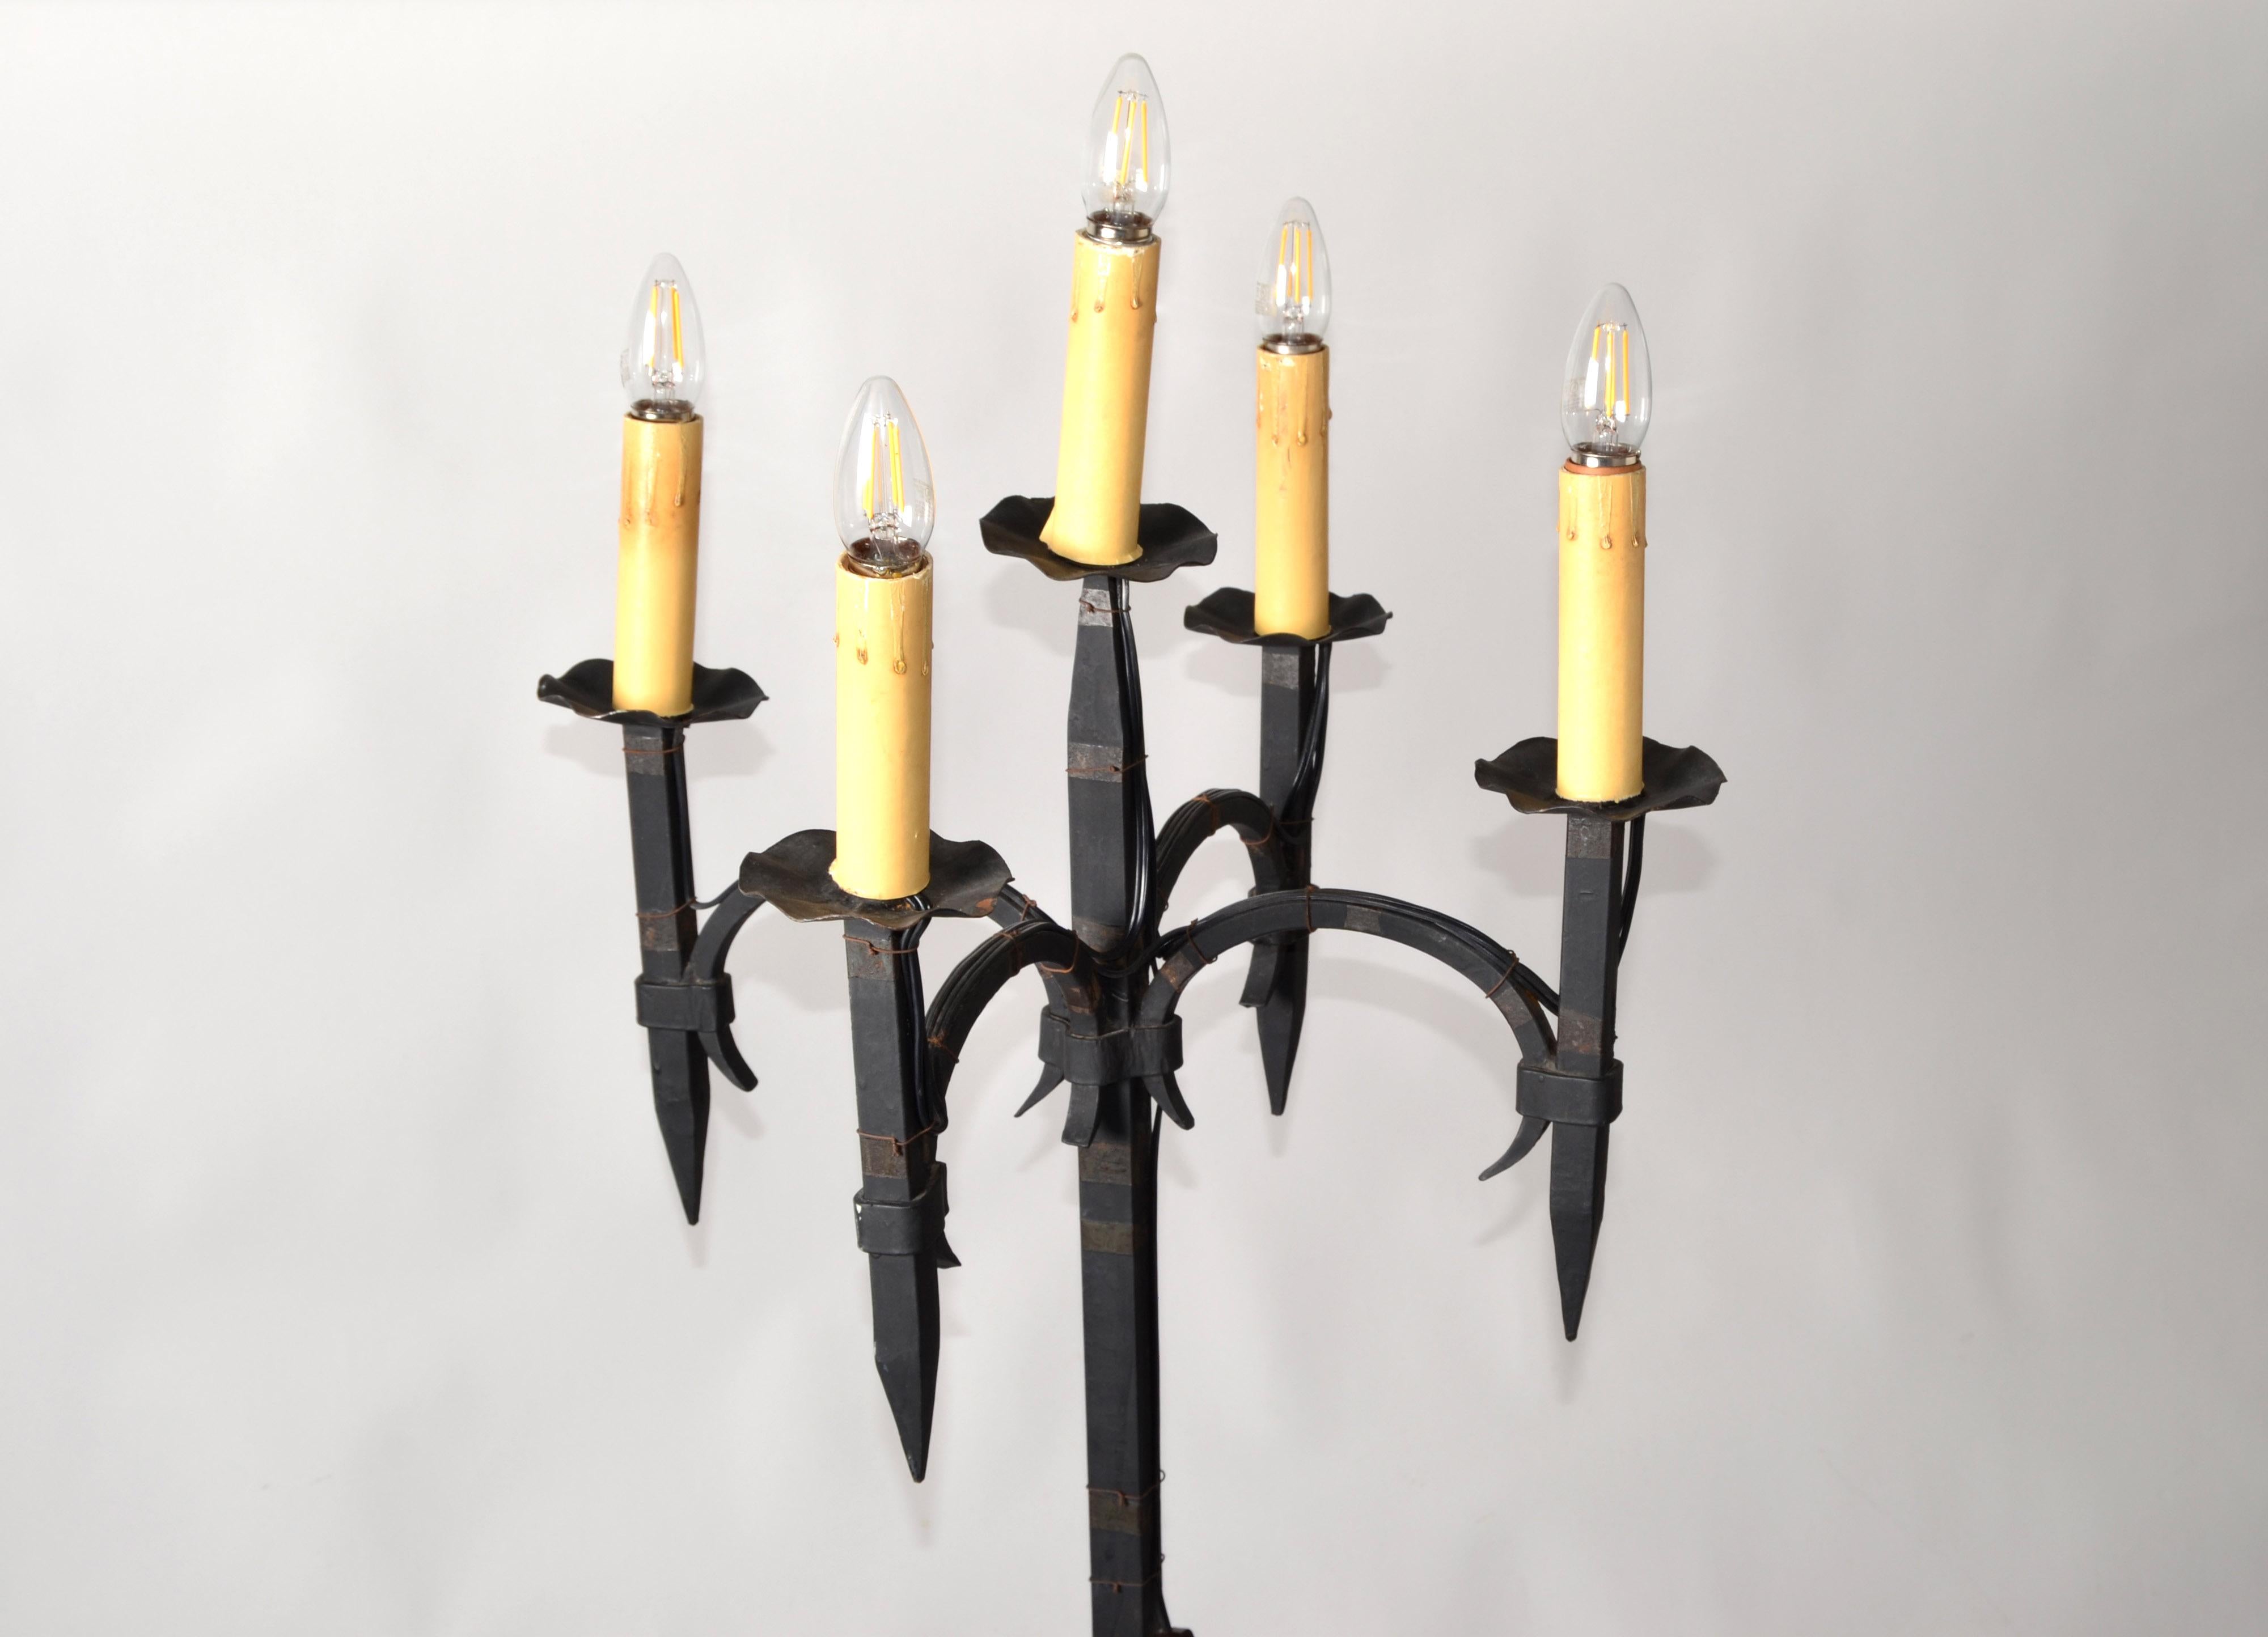 Early 20th Century French Forged Wrought Iron 5 Light Candelabra Floor Lamp For Sale 2